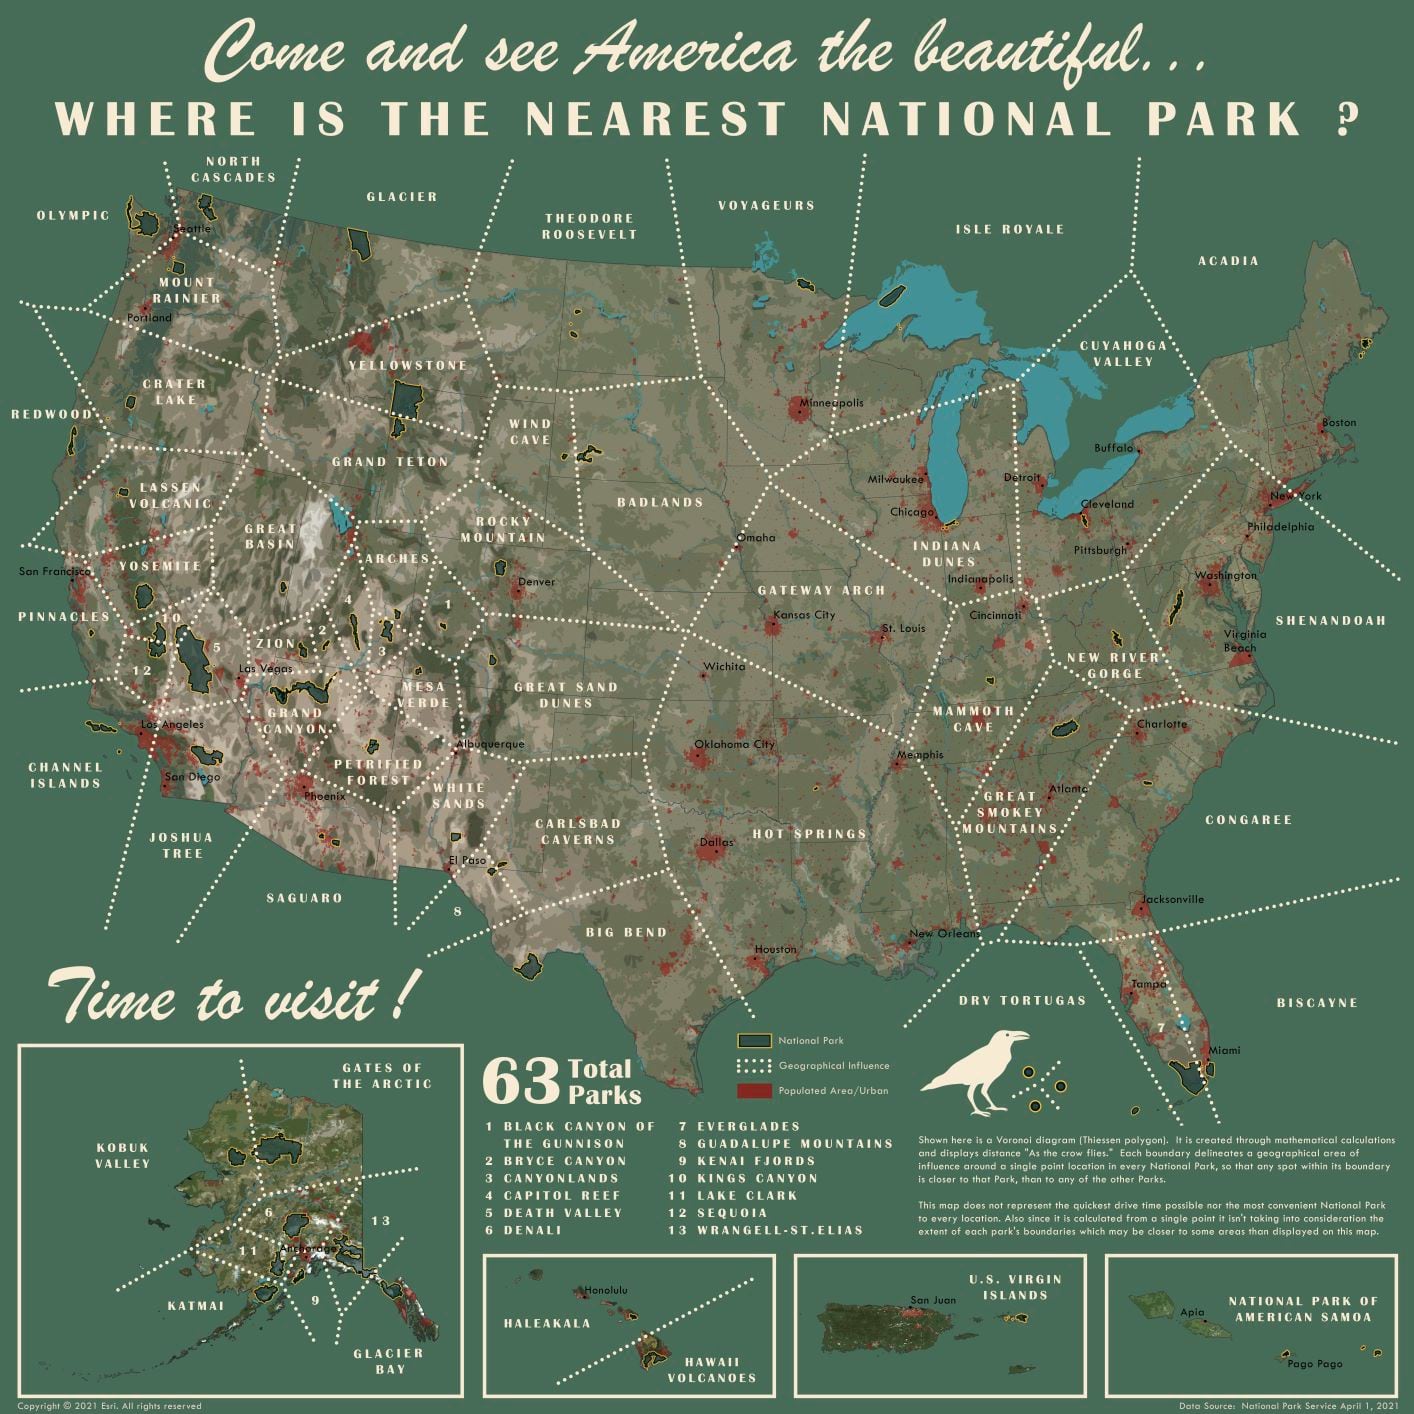 Where is the nearest National Park map